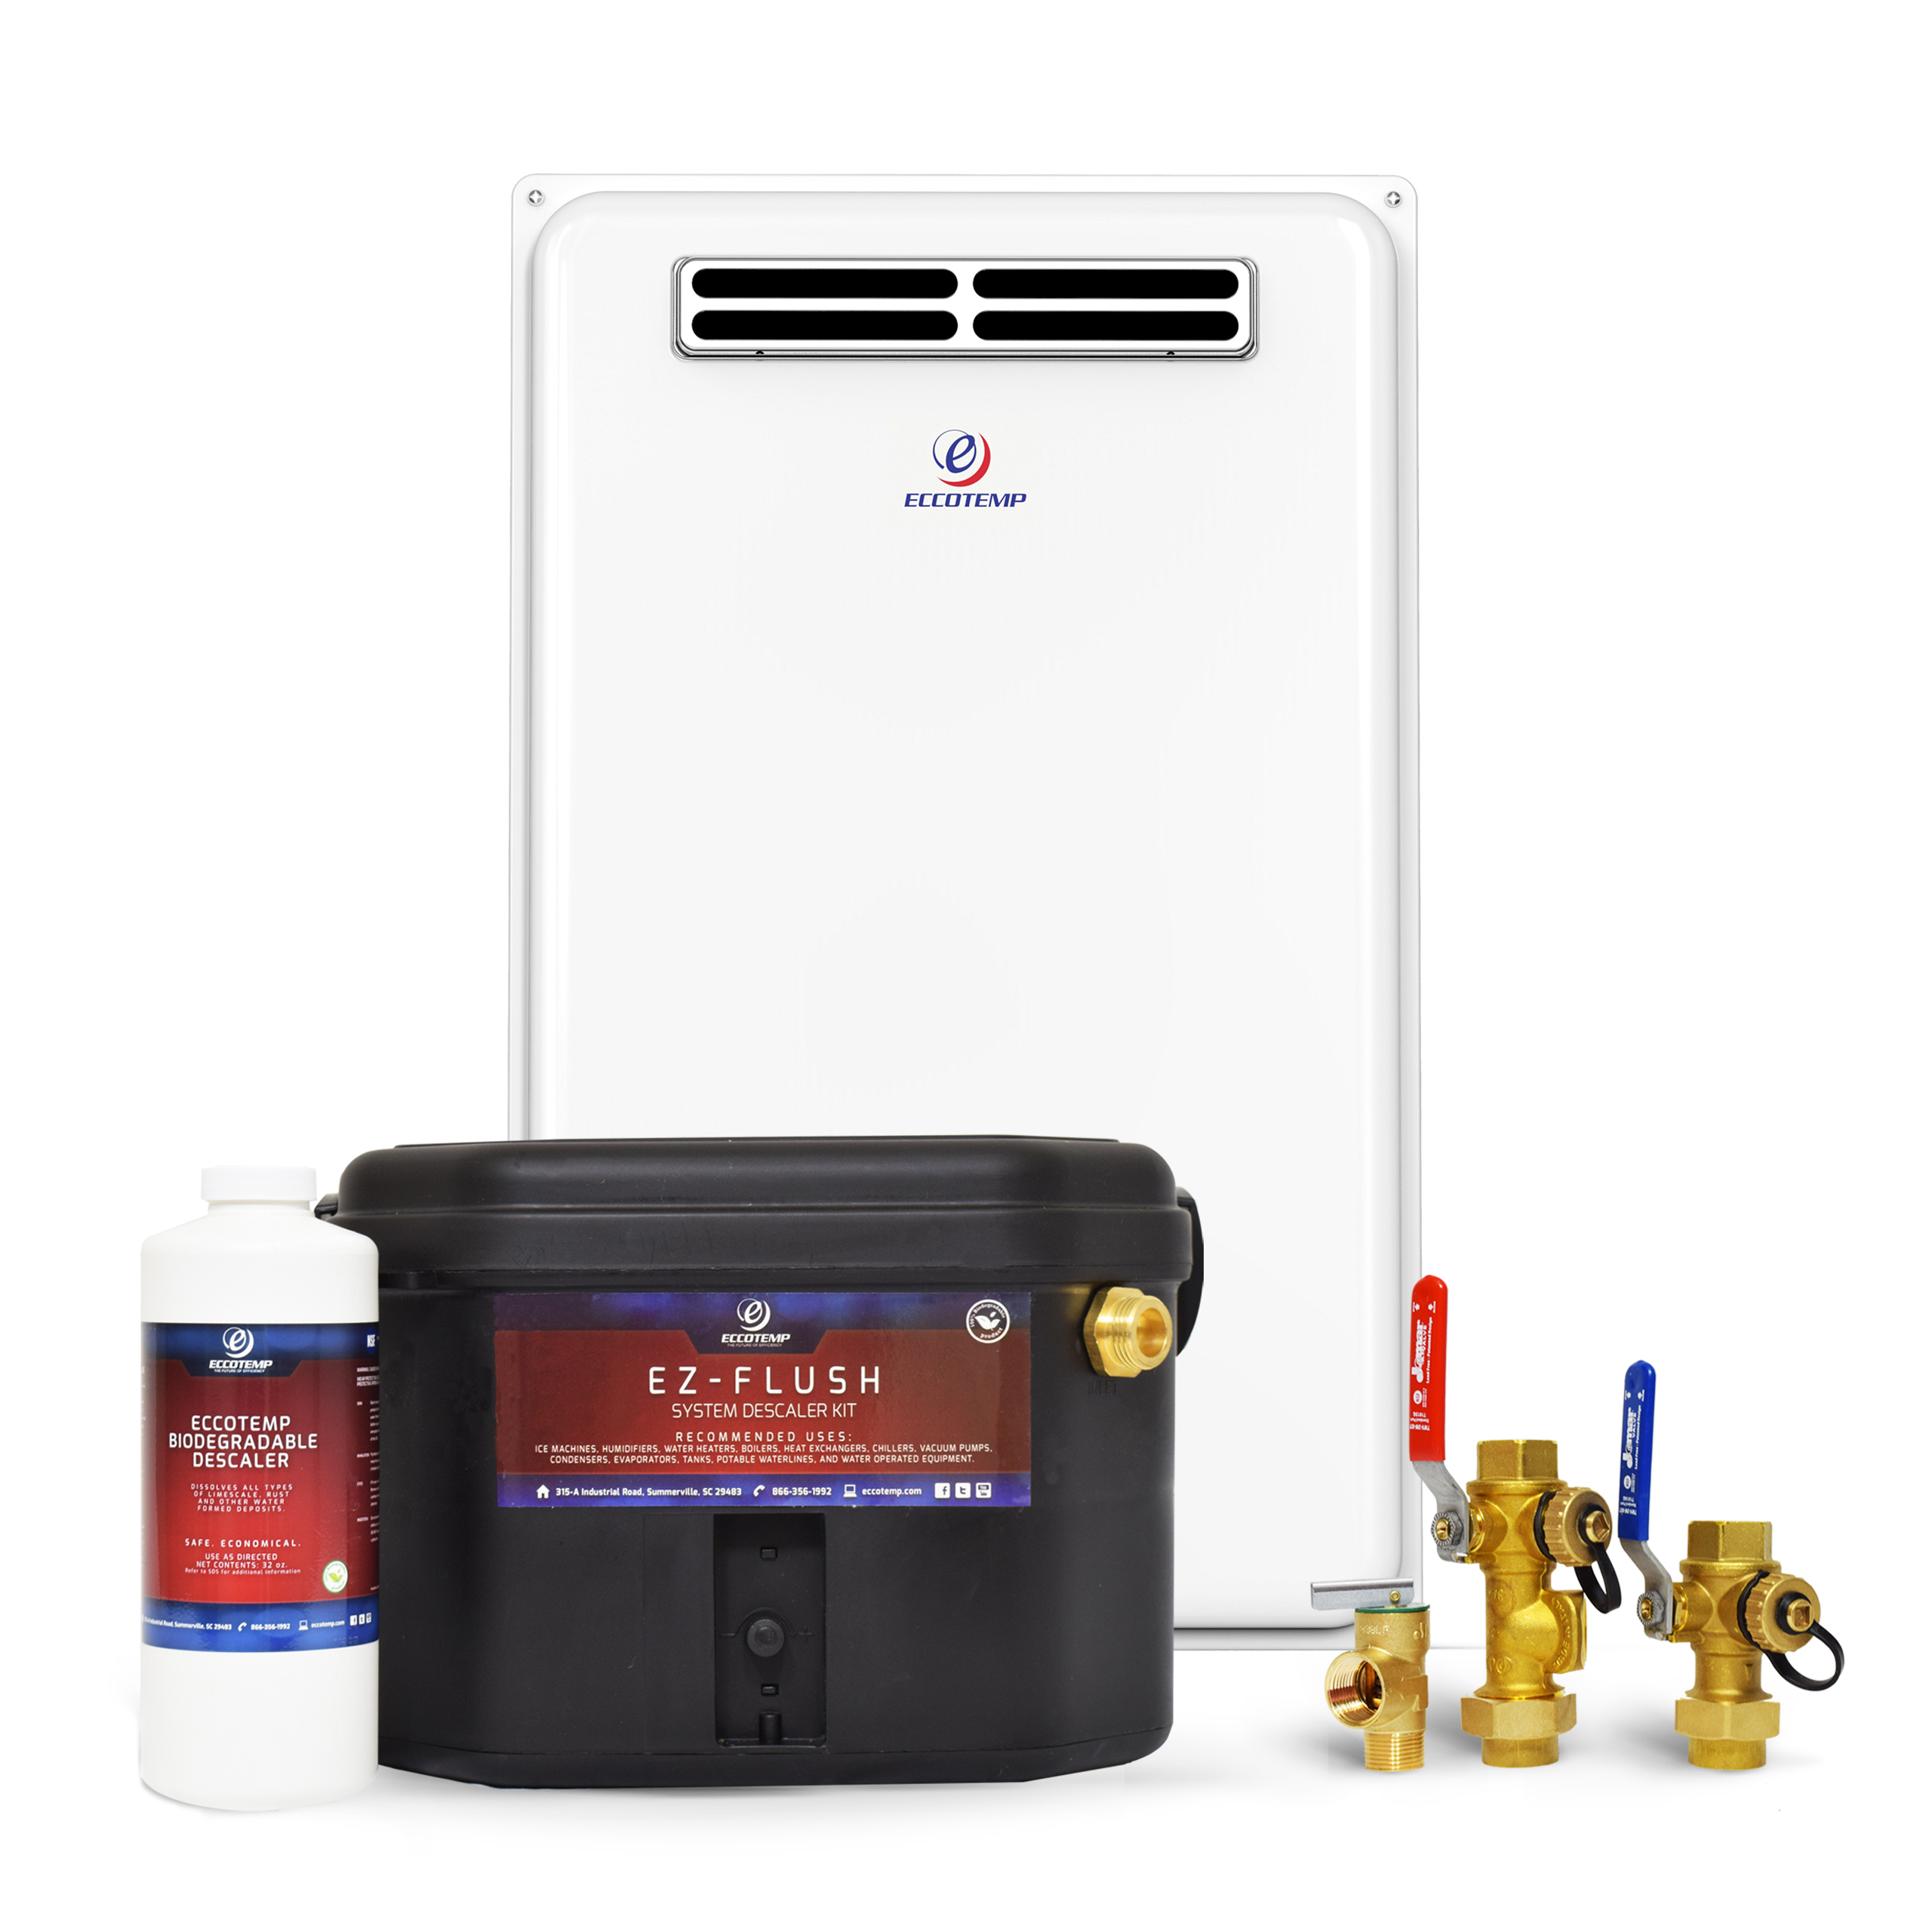 Eccotemp 45H Outdoor 6.8 GPM Natural Gas Tankless Water Heater Service Kit Bundle